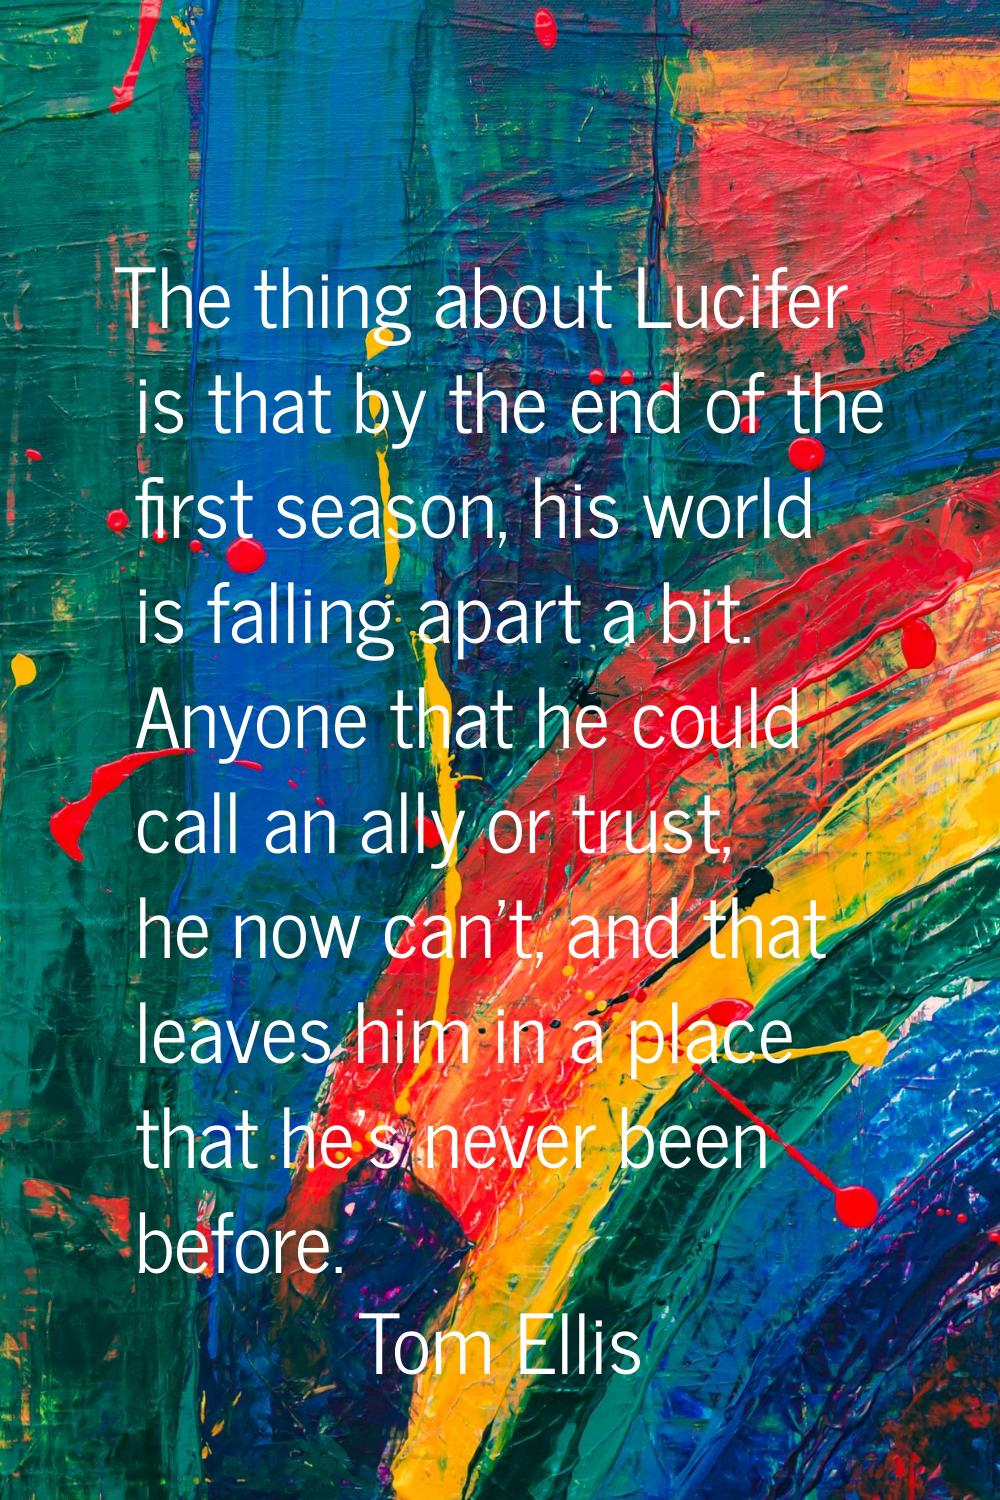 The thing about Lucifer is that by the end of the first season, his world is falling apart a bit. A